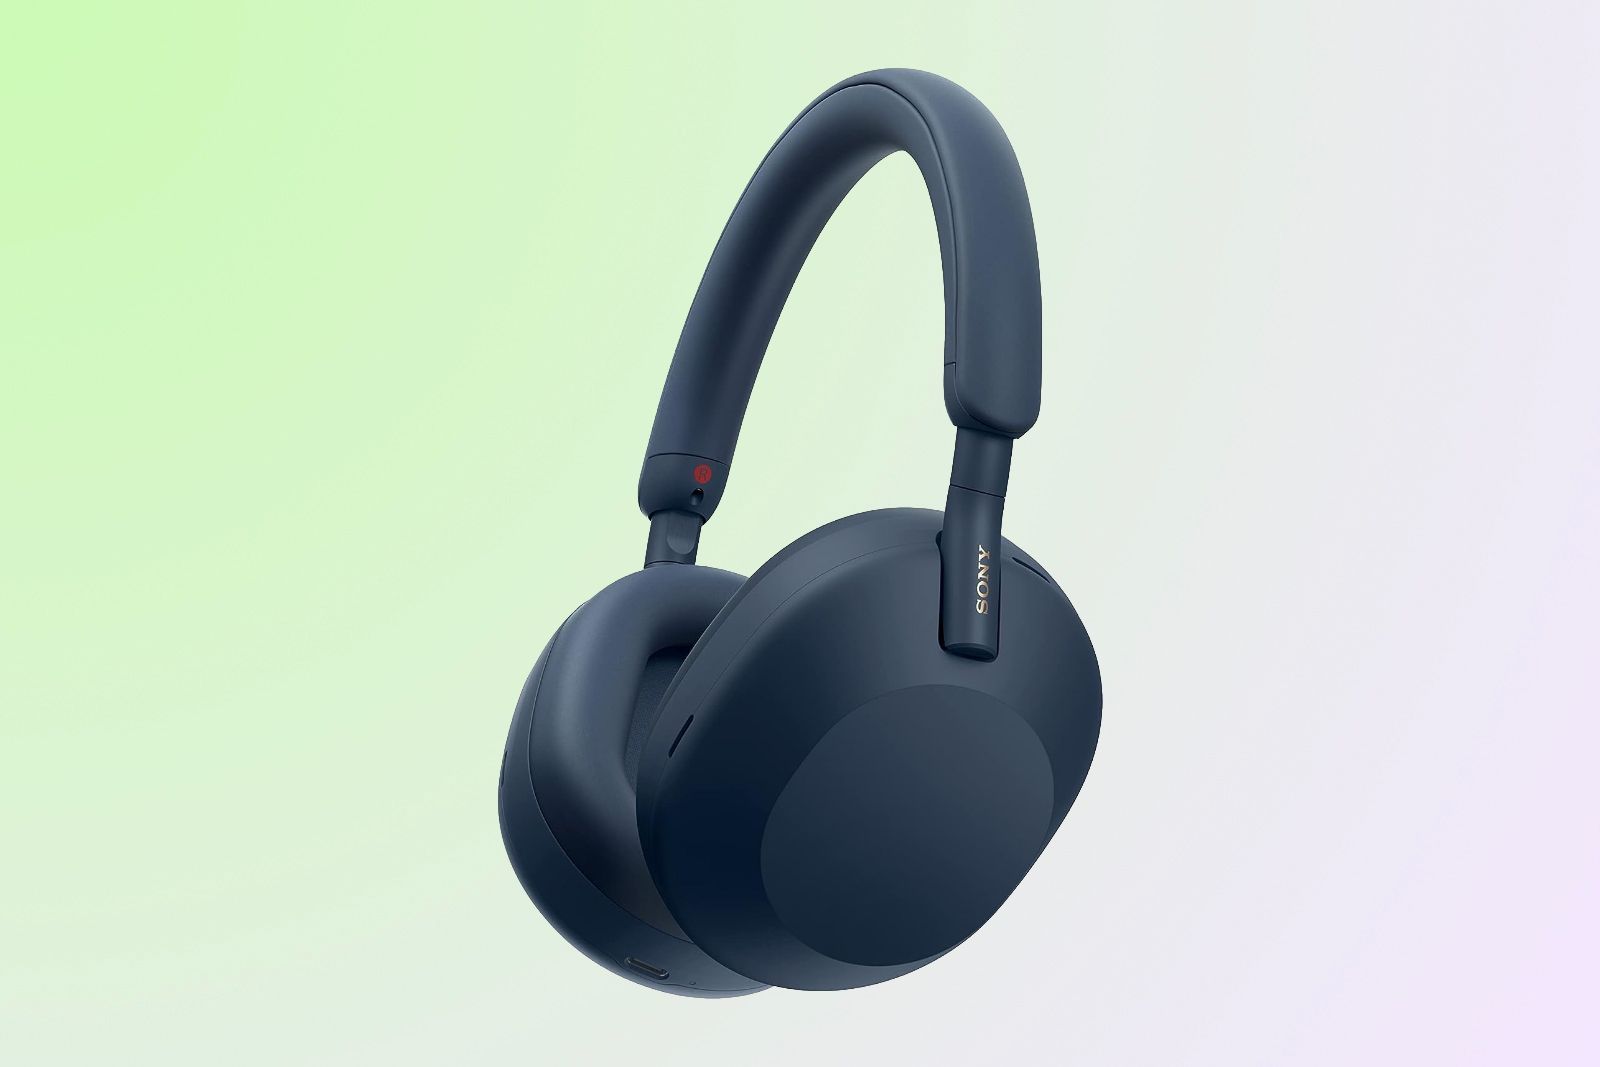 Blue Sony headphones over a blueish-green background